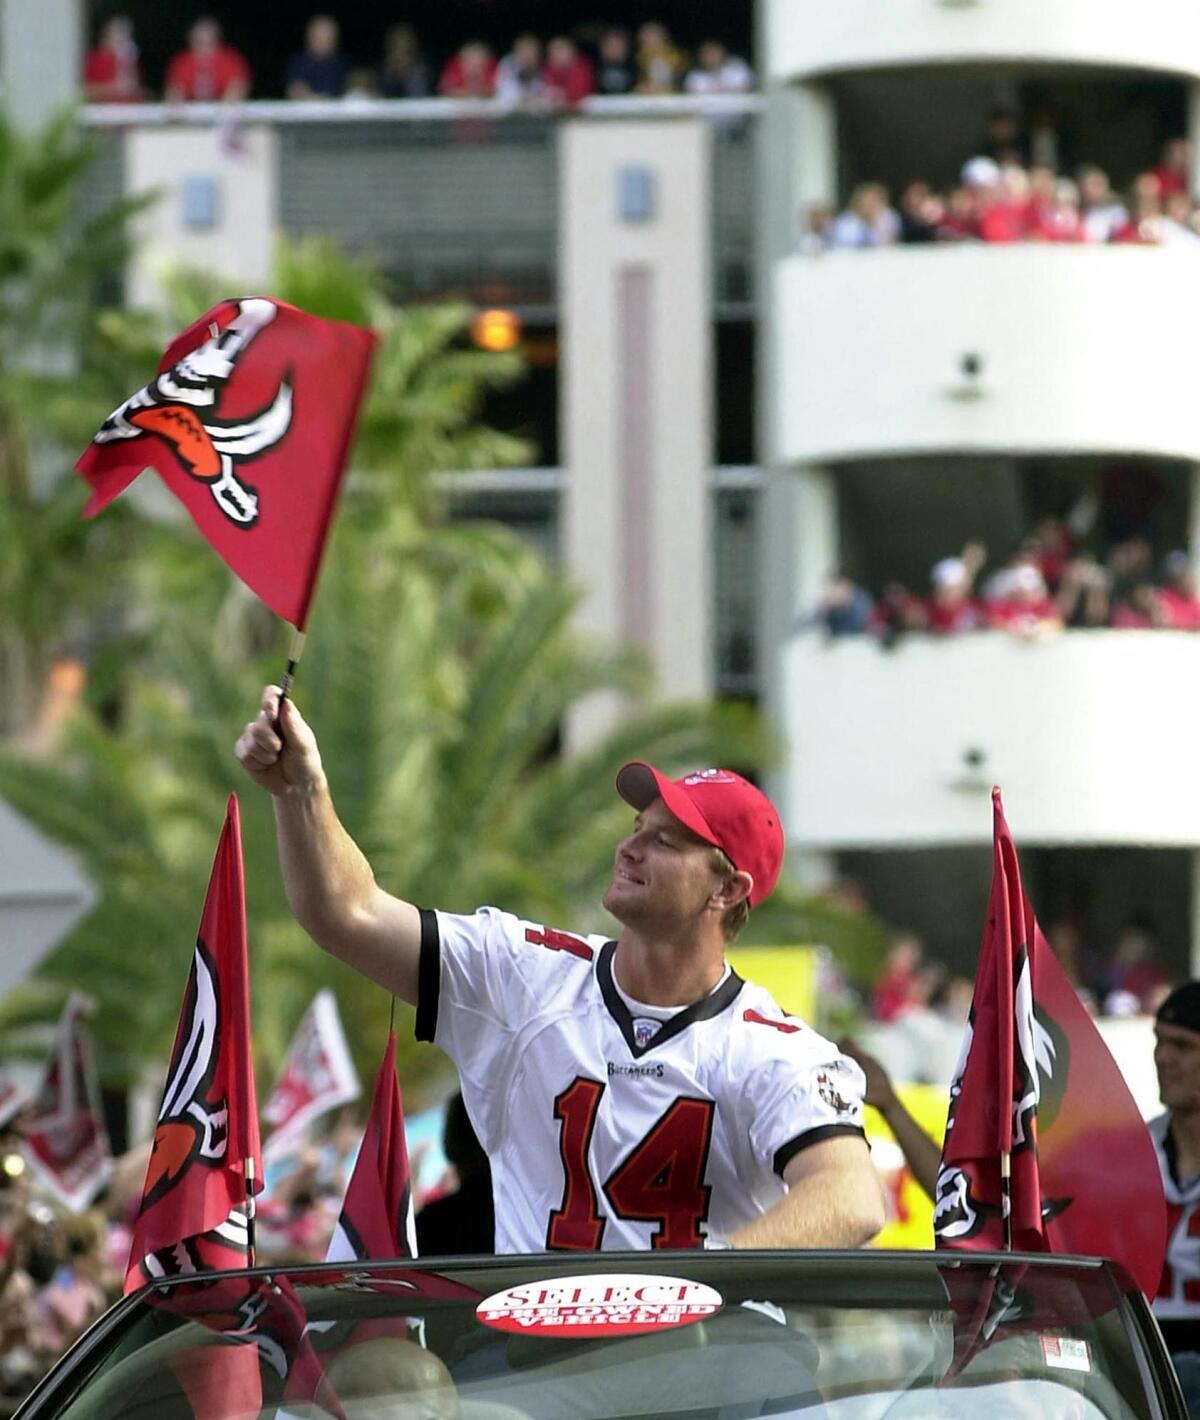 Buccaneers' quarterback Brad Johnson waves a team flag to the crowd during a Super Bowl victory parade in 2003.